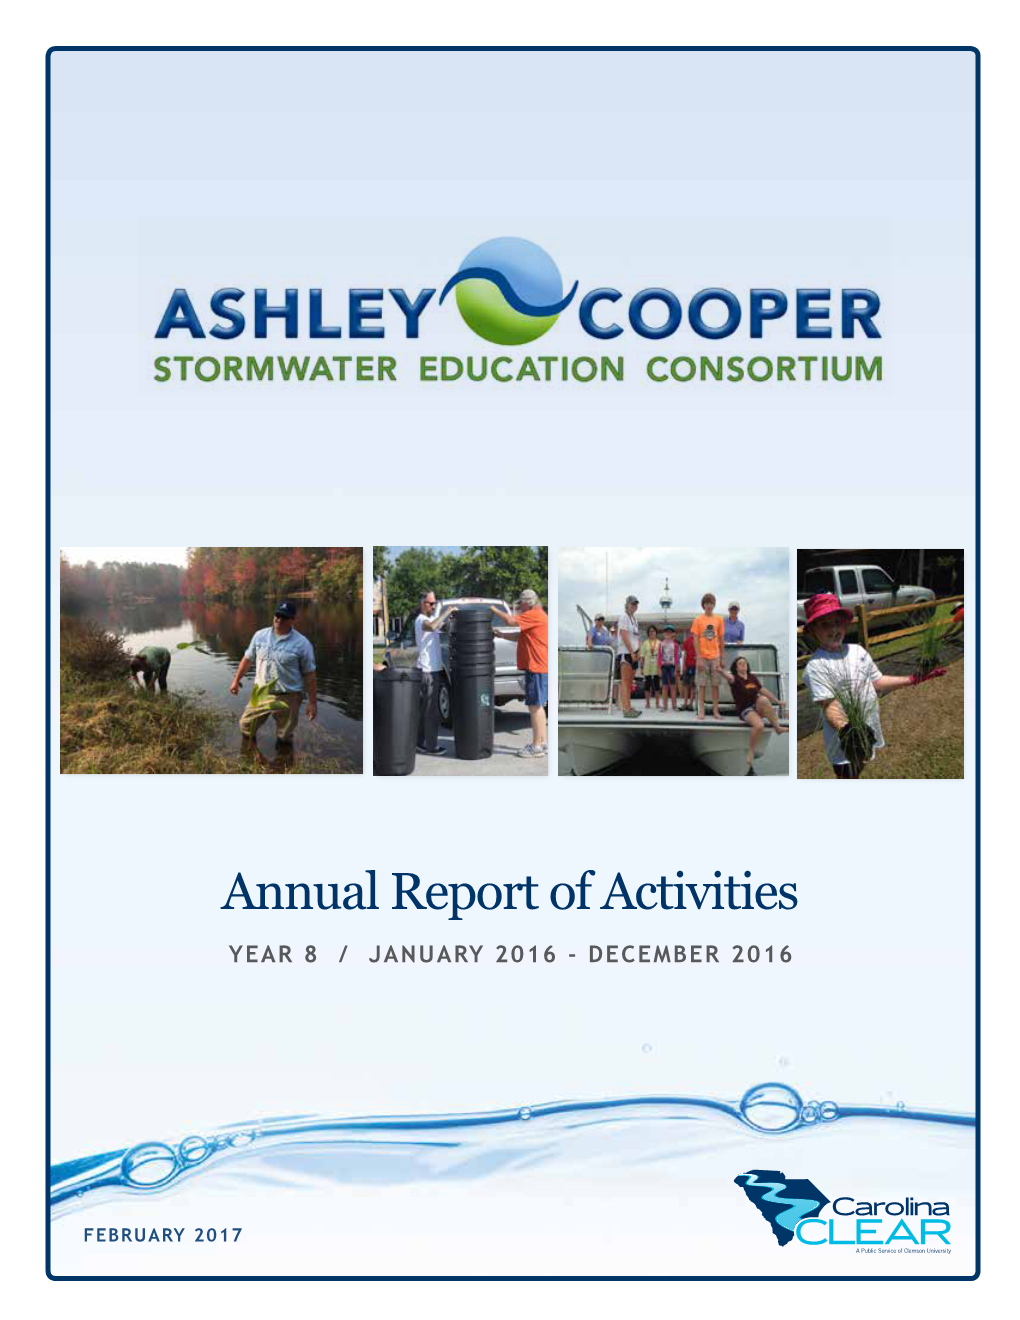 2016 Annual Report, Year 8